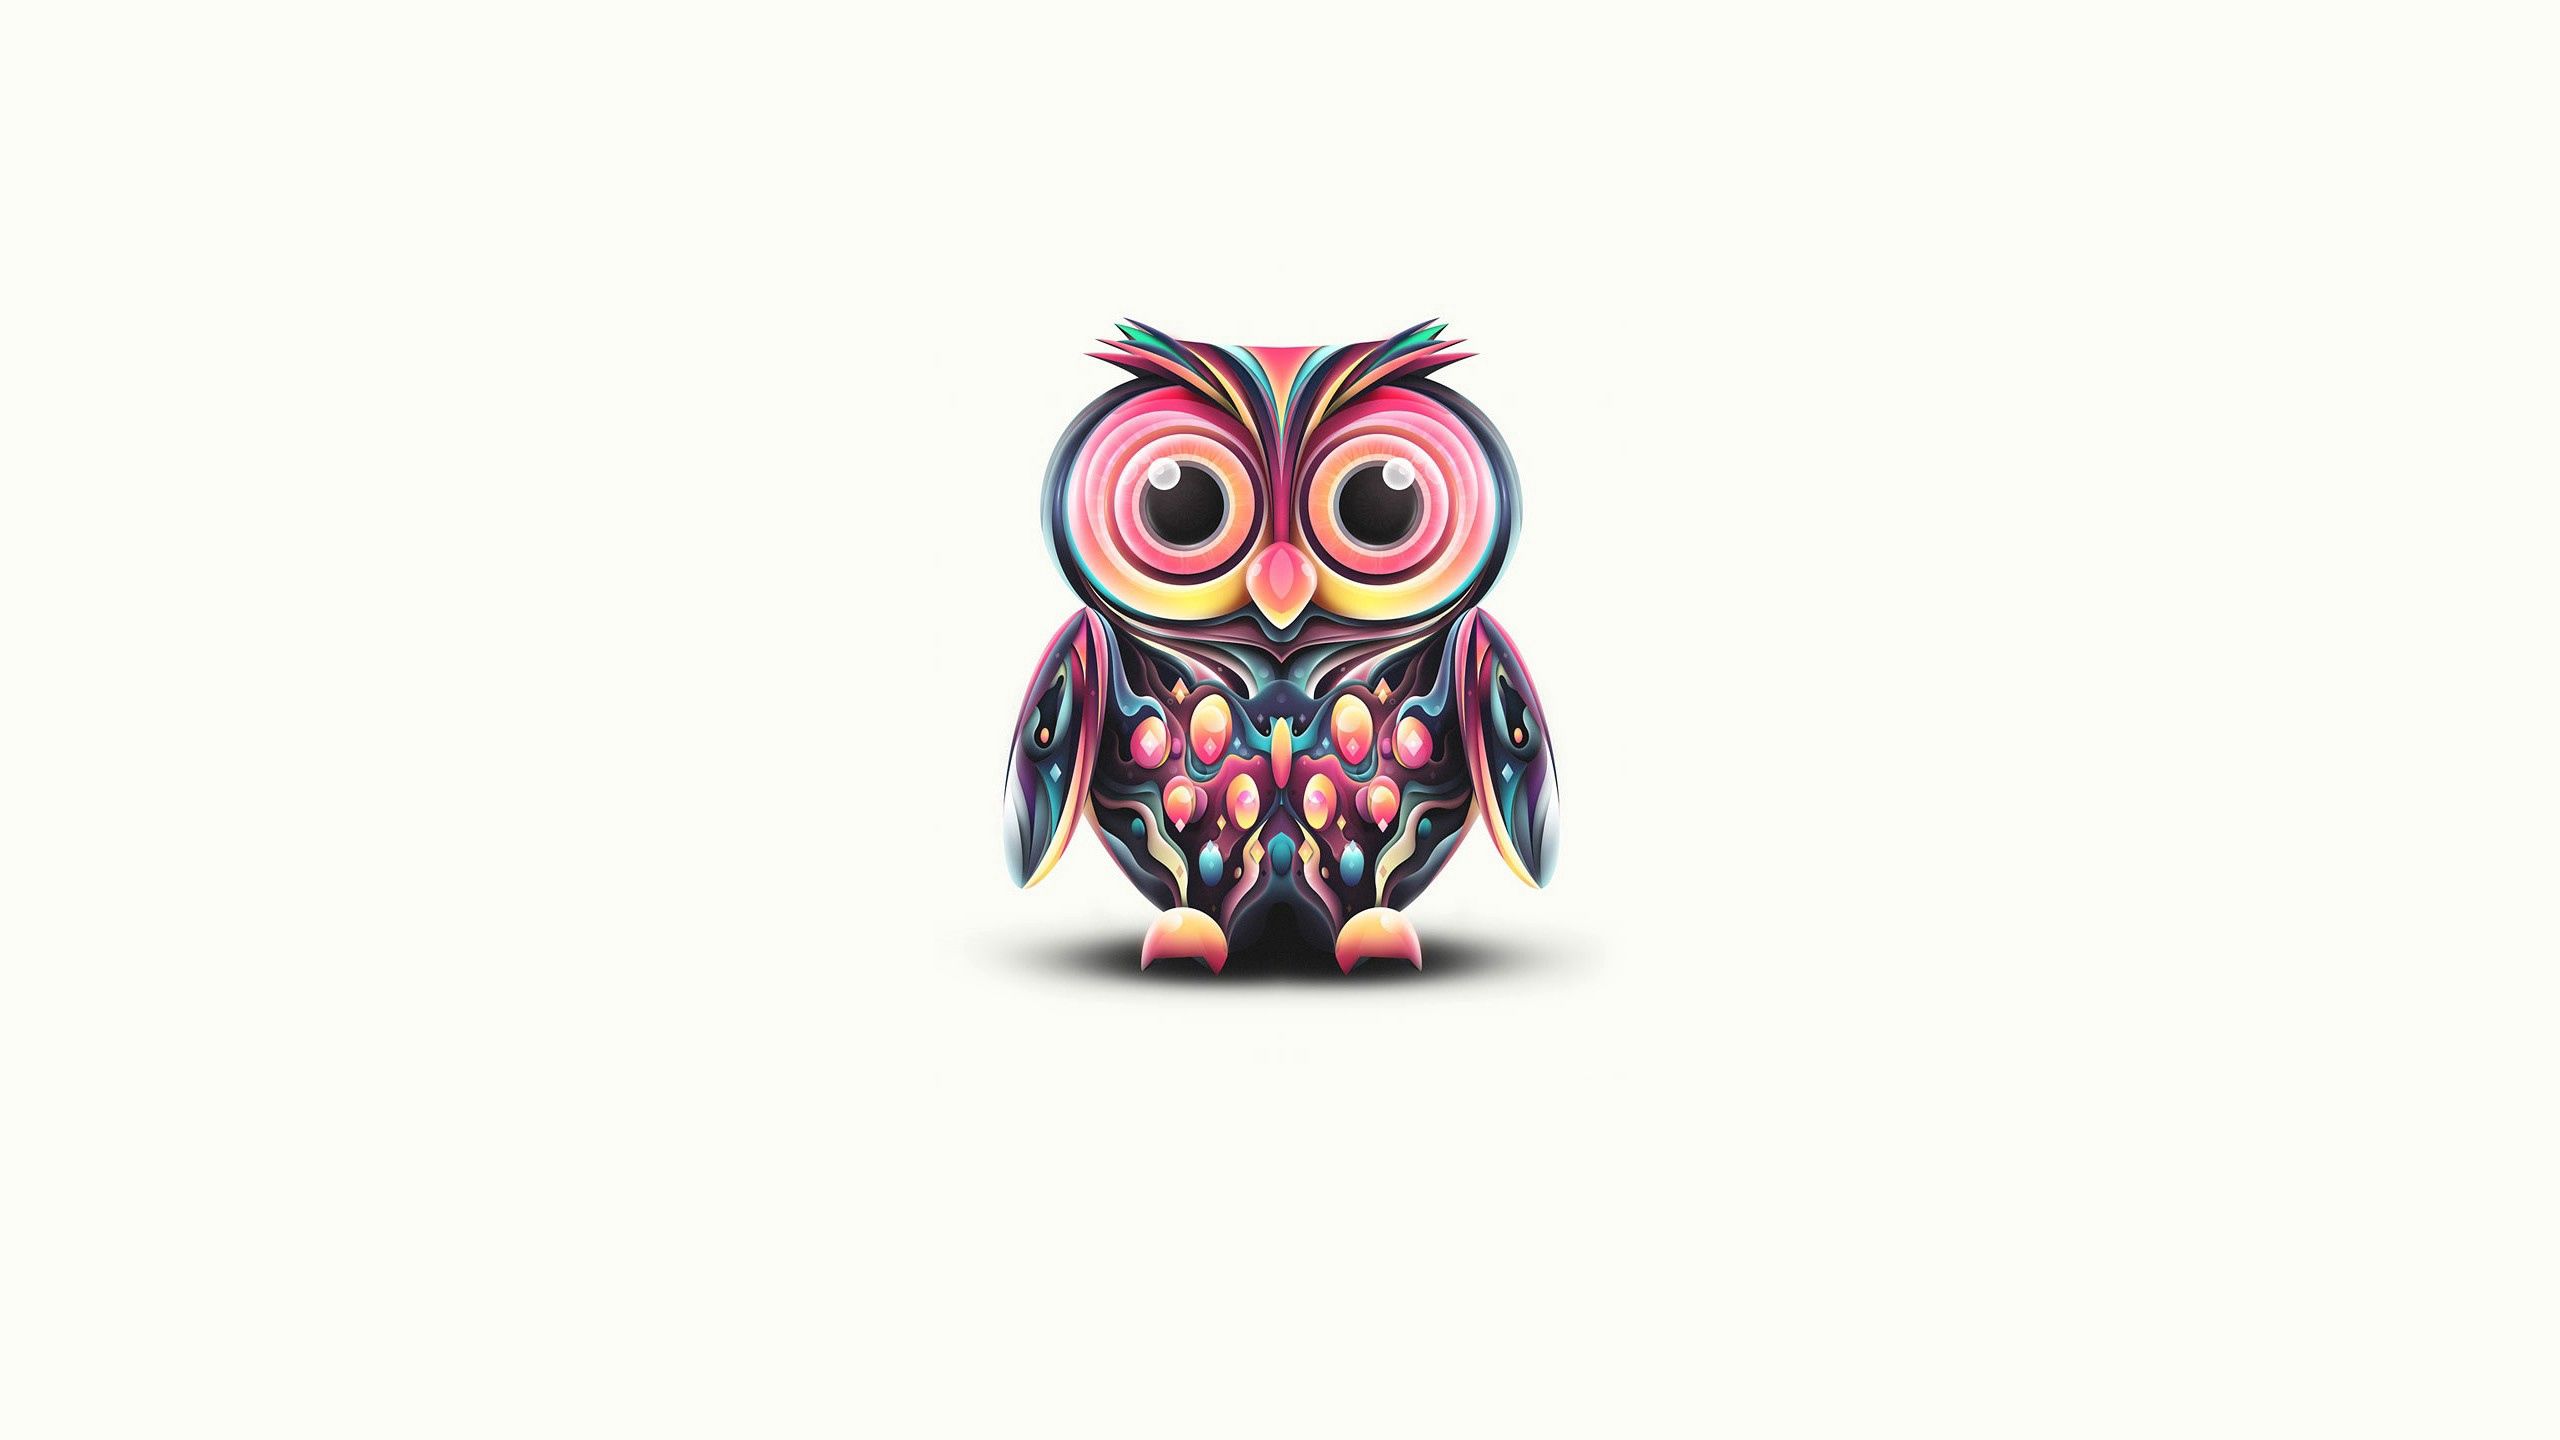 82175 1280x1024 PC pictures for free, download drawing, owl, art, feather 1280x1024 wallpapers on your desktop